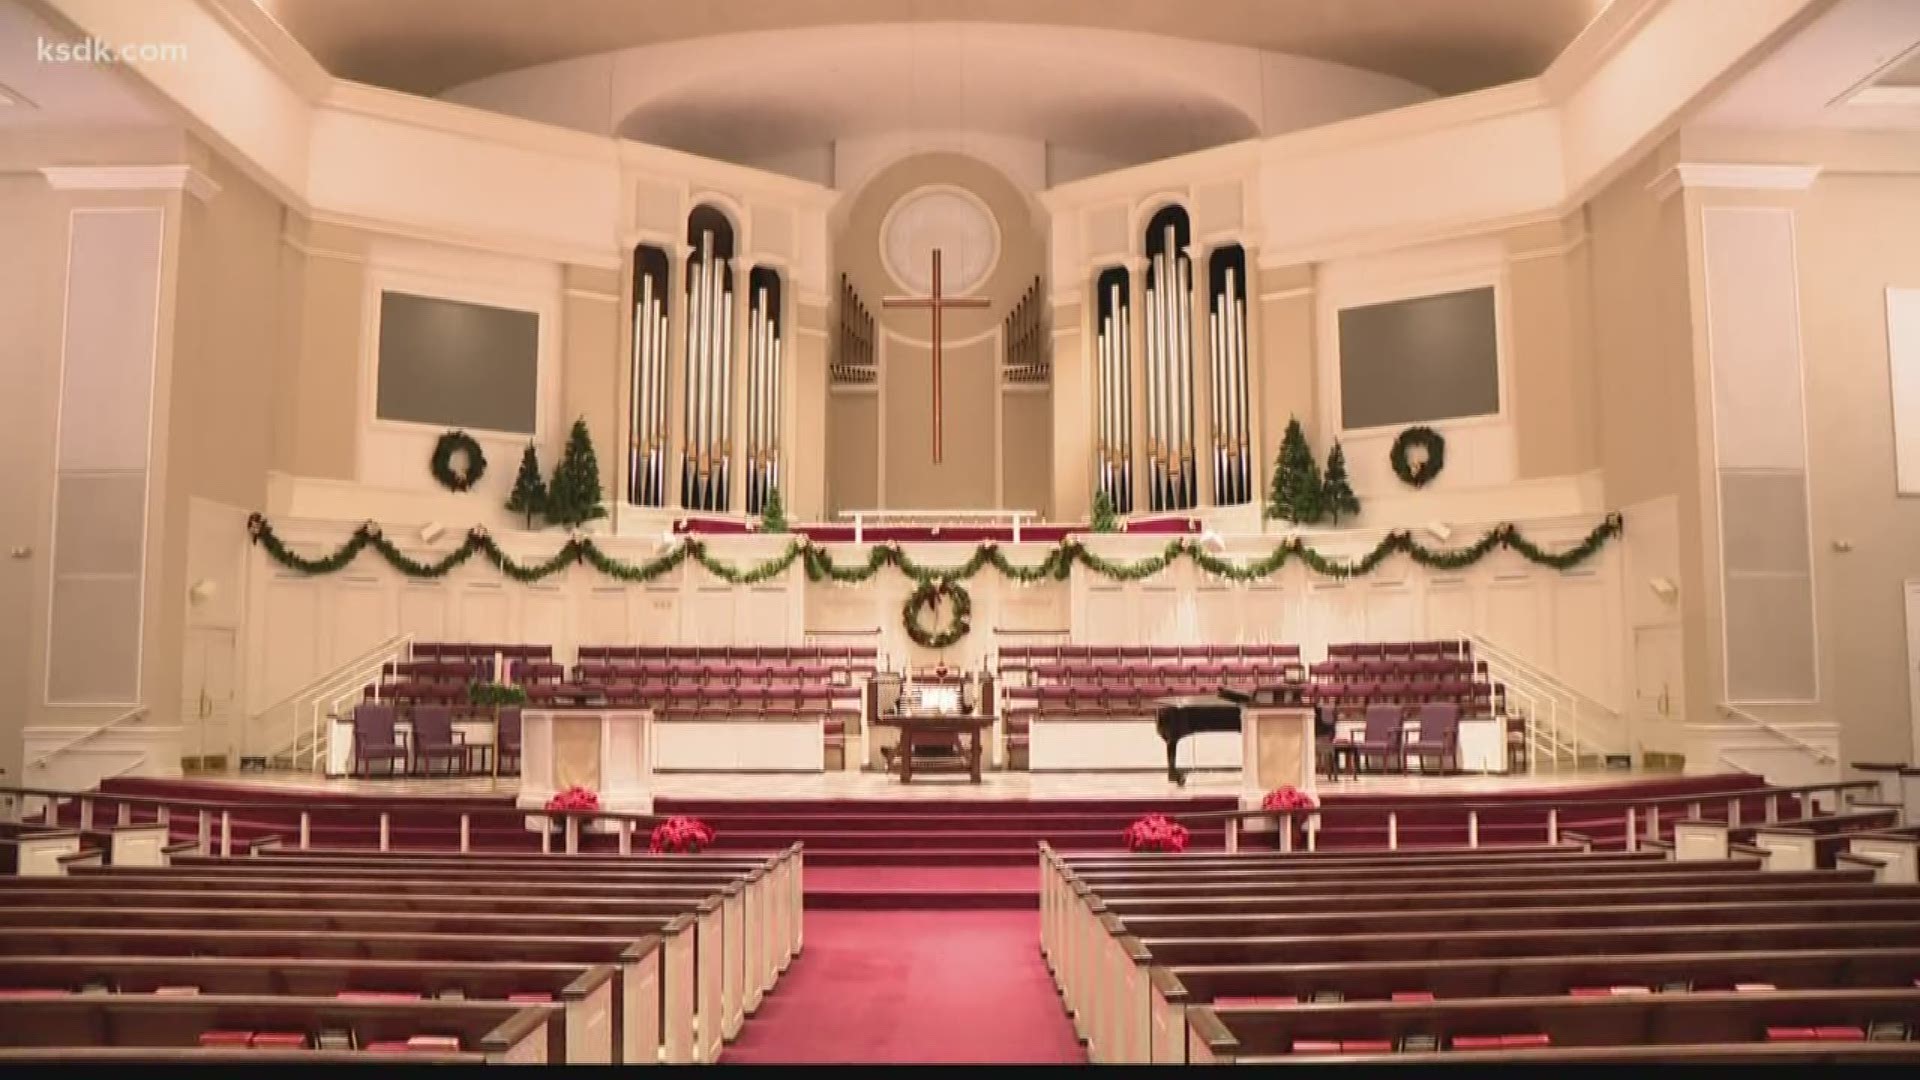 This proposal could split the United Methodist Church into two denominations